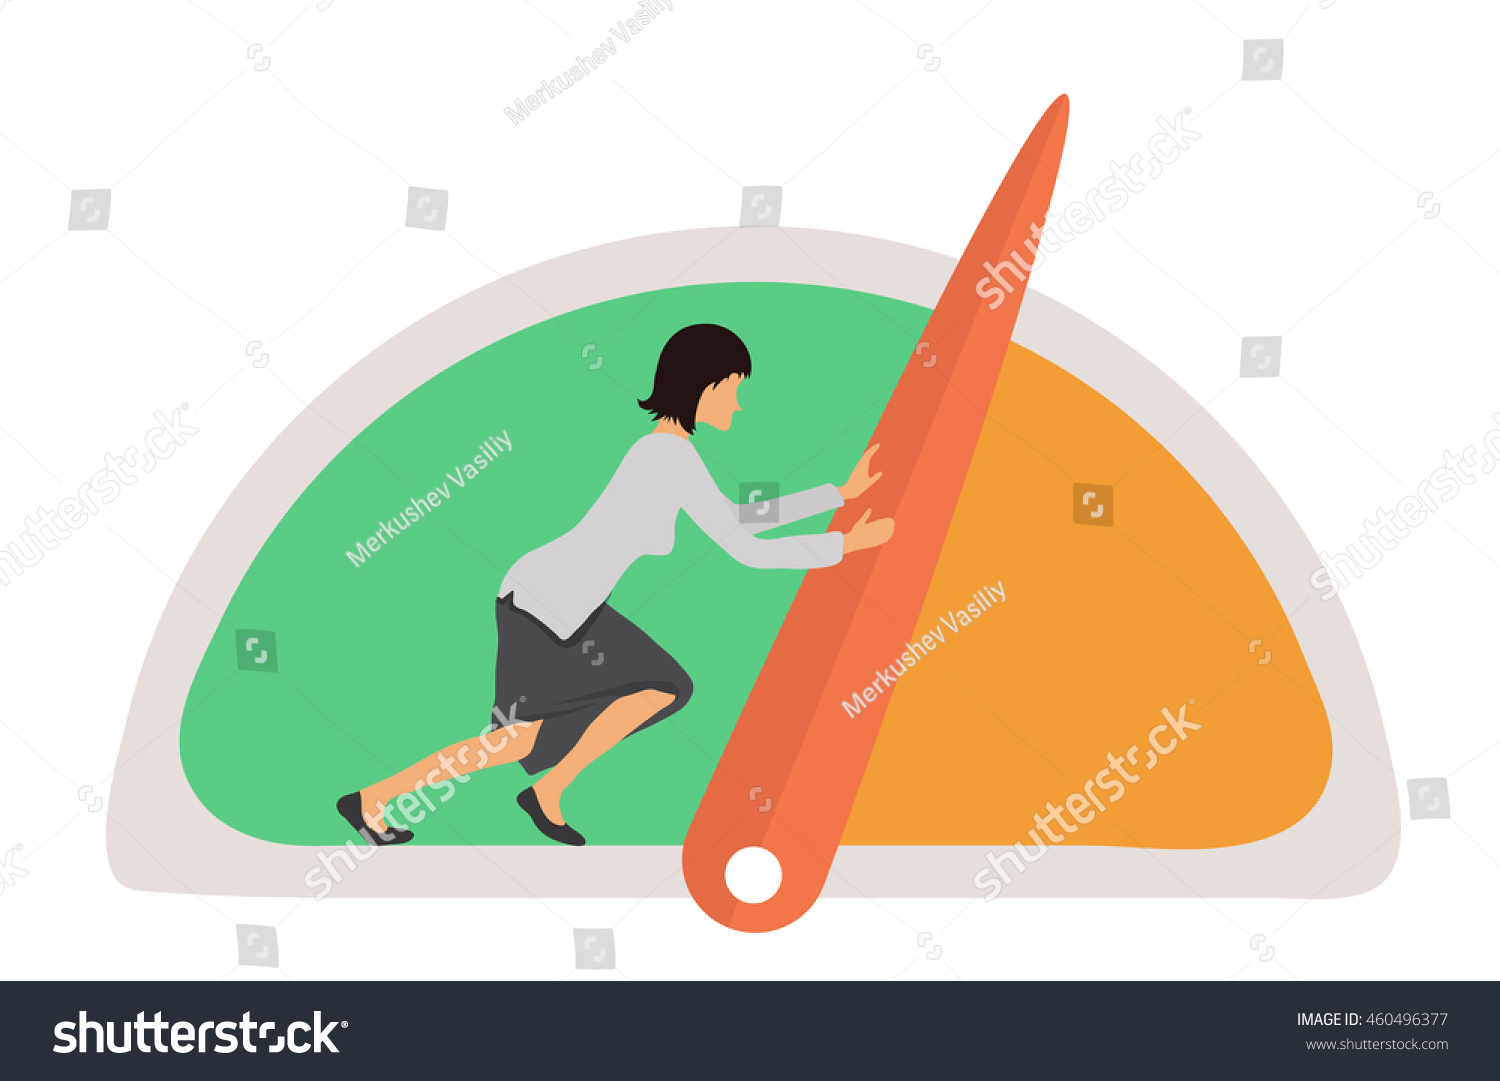 SVG of Benchmarking concept illustration. Woman and Speedometer, manometer or general indicators with needles, vector svg